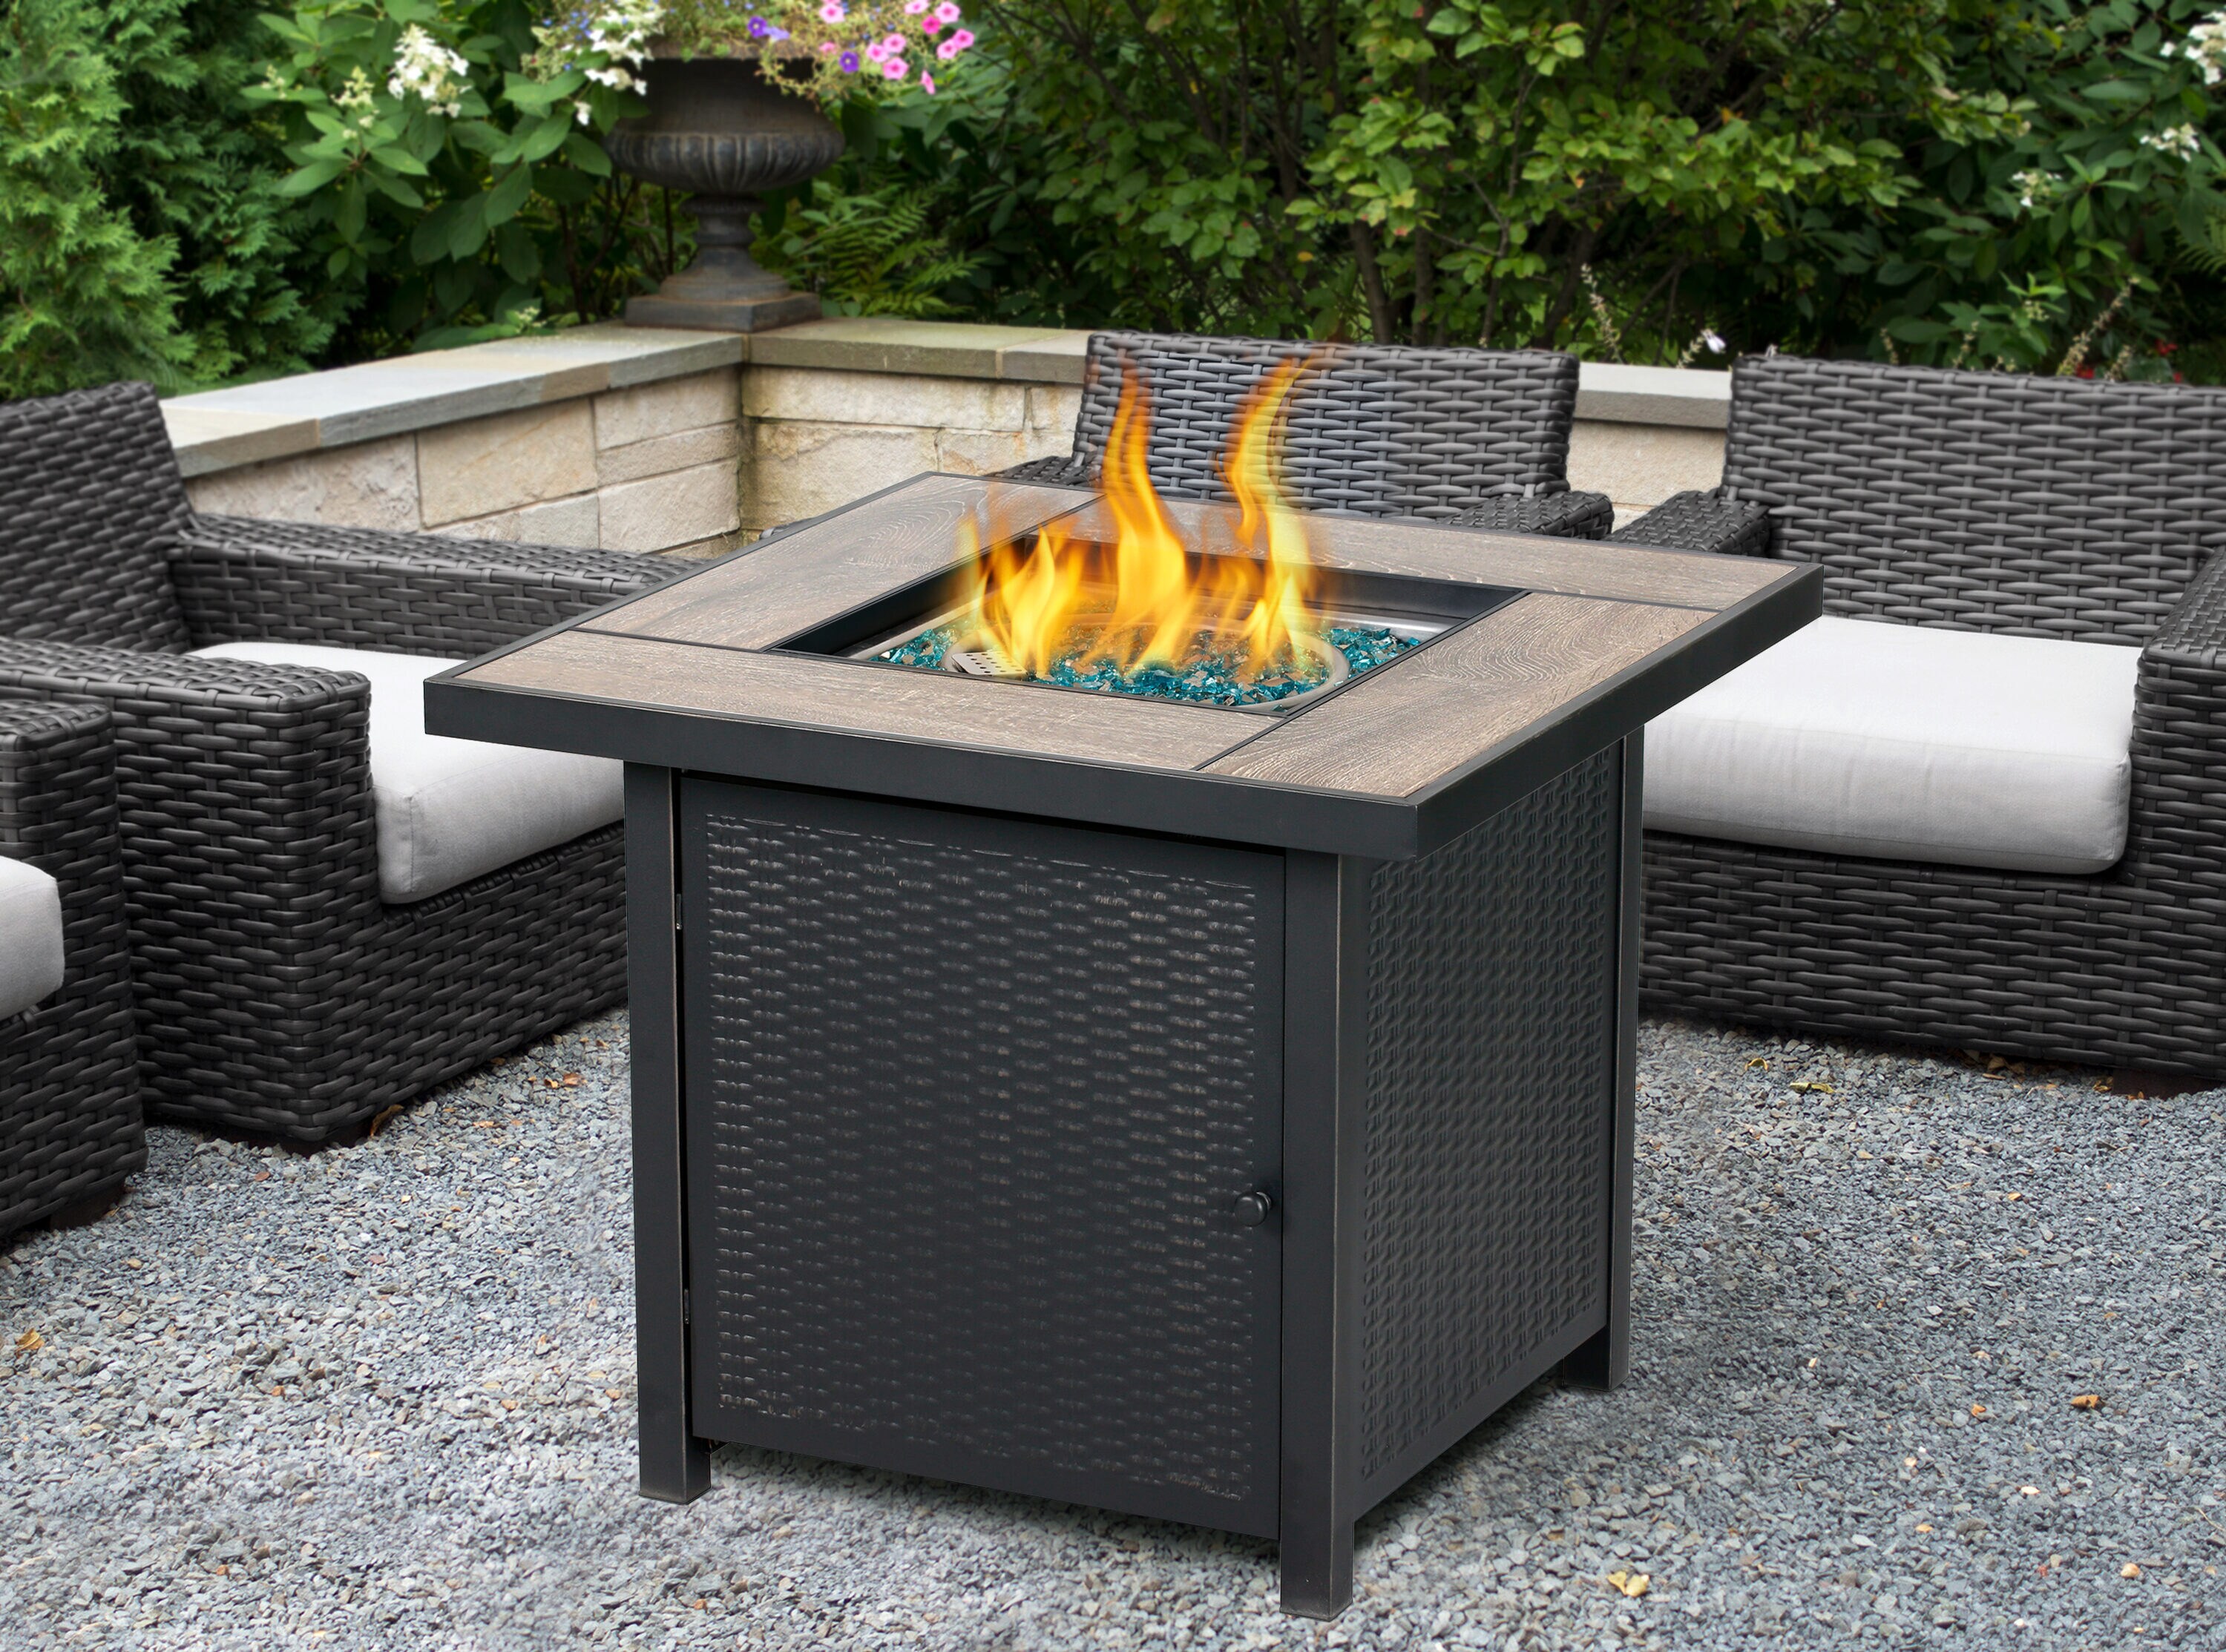 HEATMAXX The 50,000 BTU outdoor propane fire pit table provides the ...